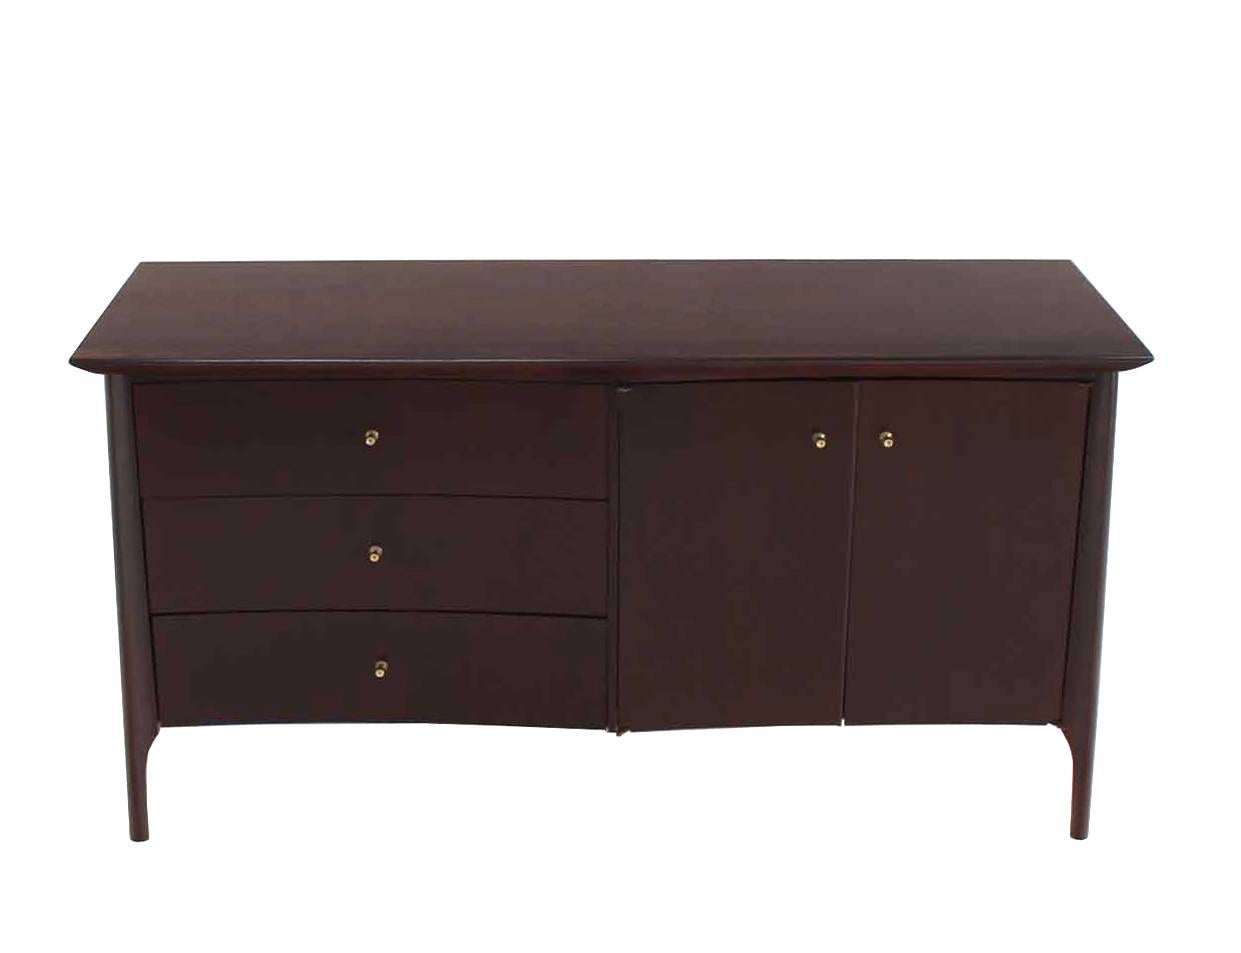 Side by side three-drawer set and double doors compartment dresser credenza.